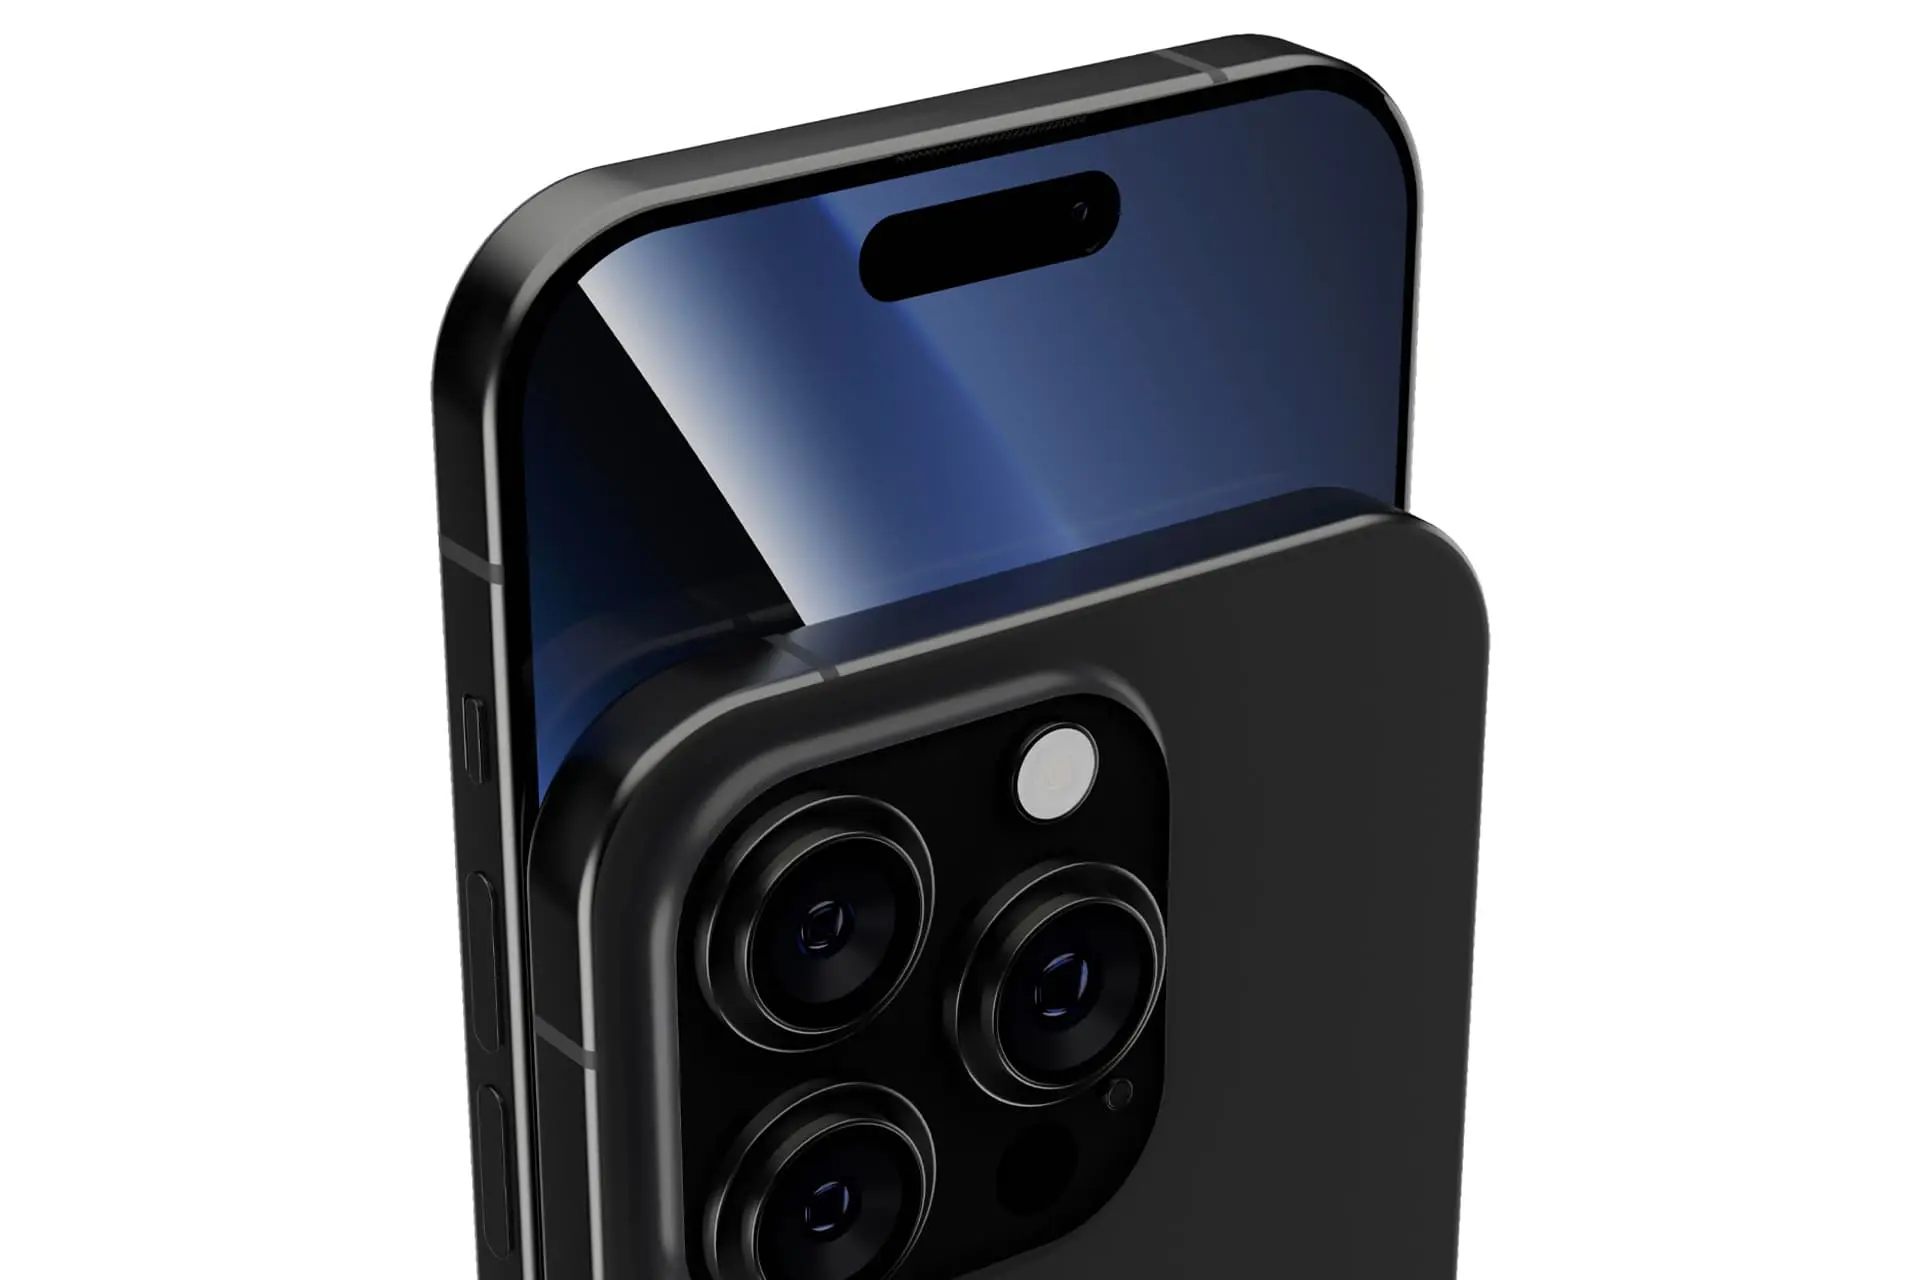 The camera and dynamic island black model of iPhone 15 Pro appeared